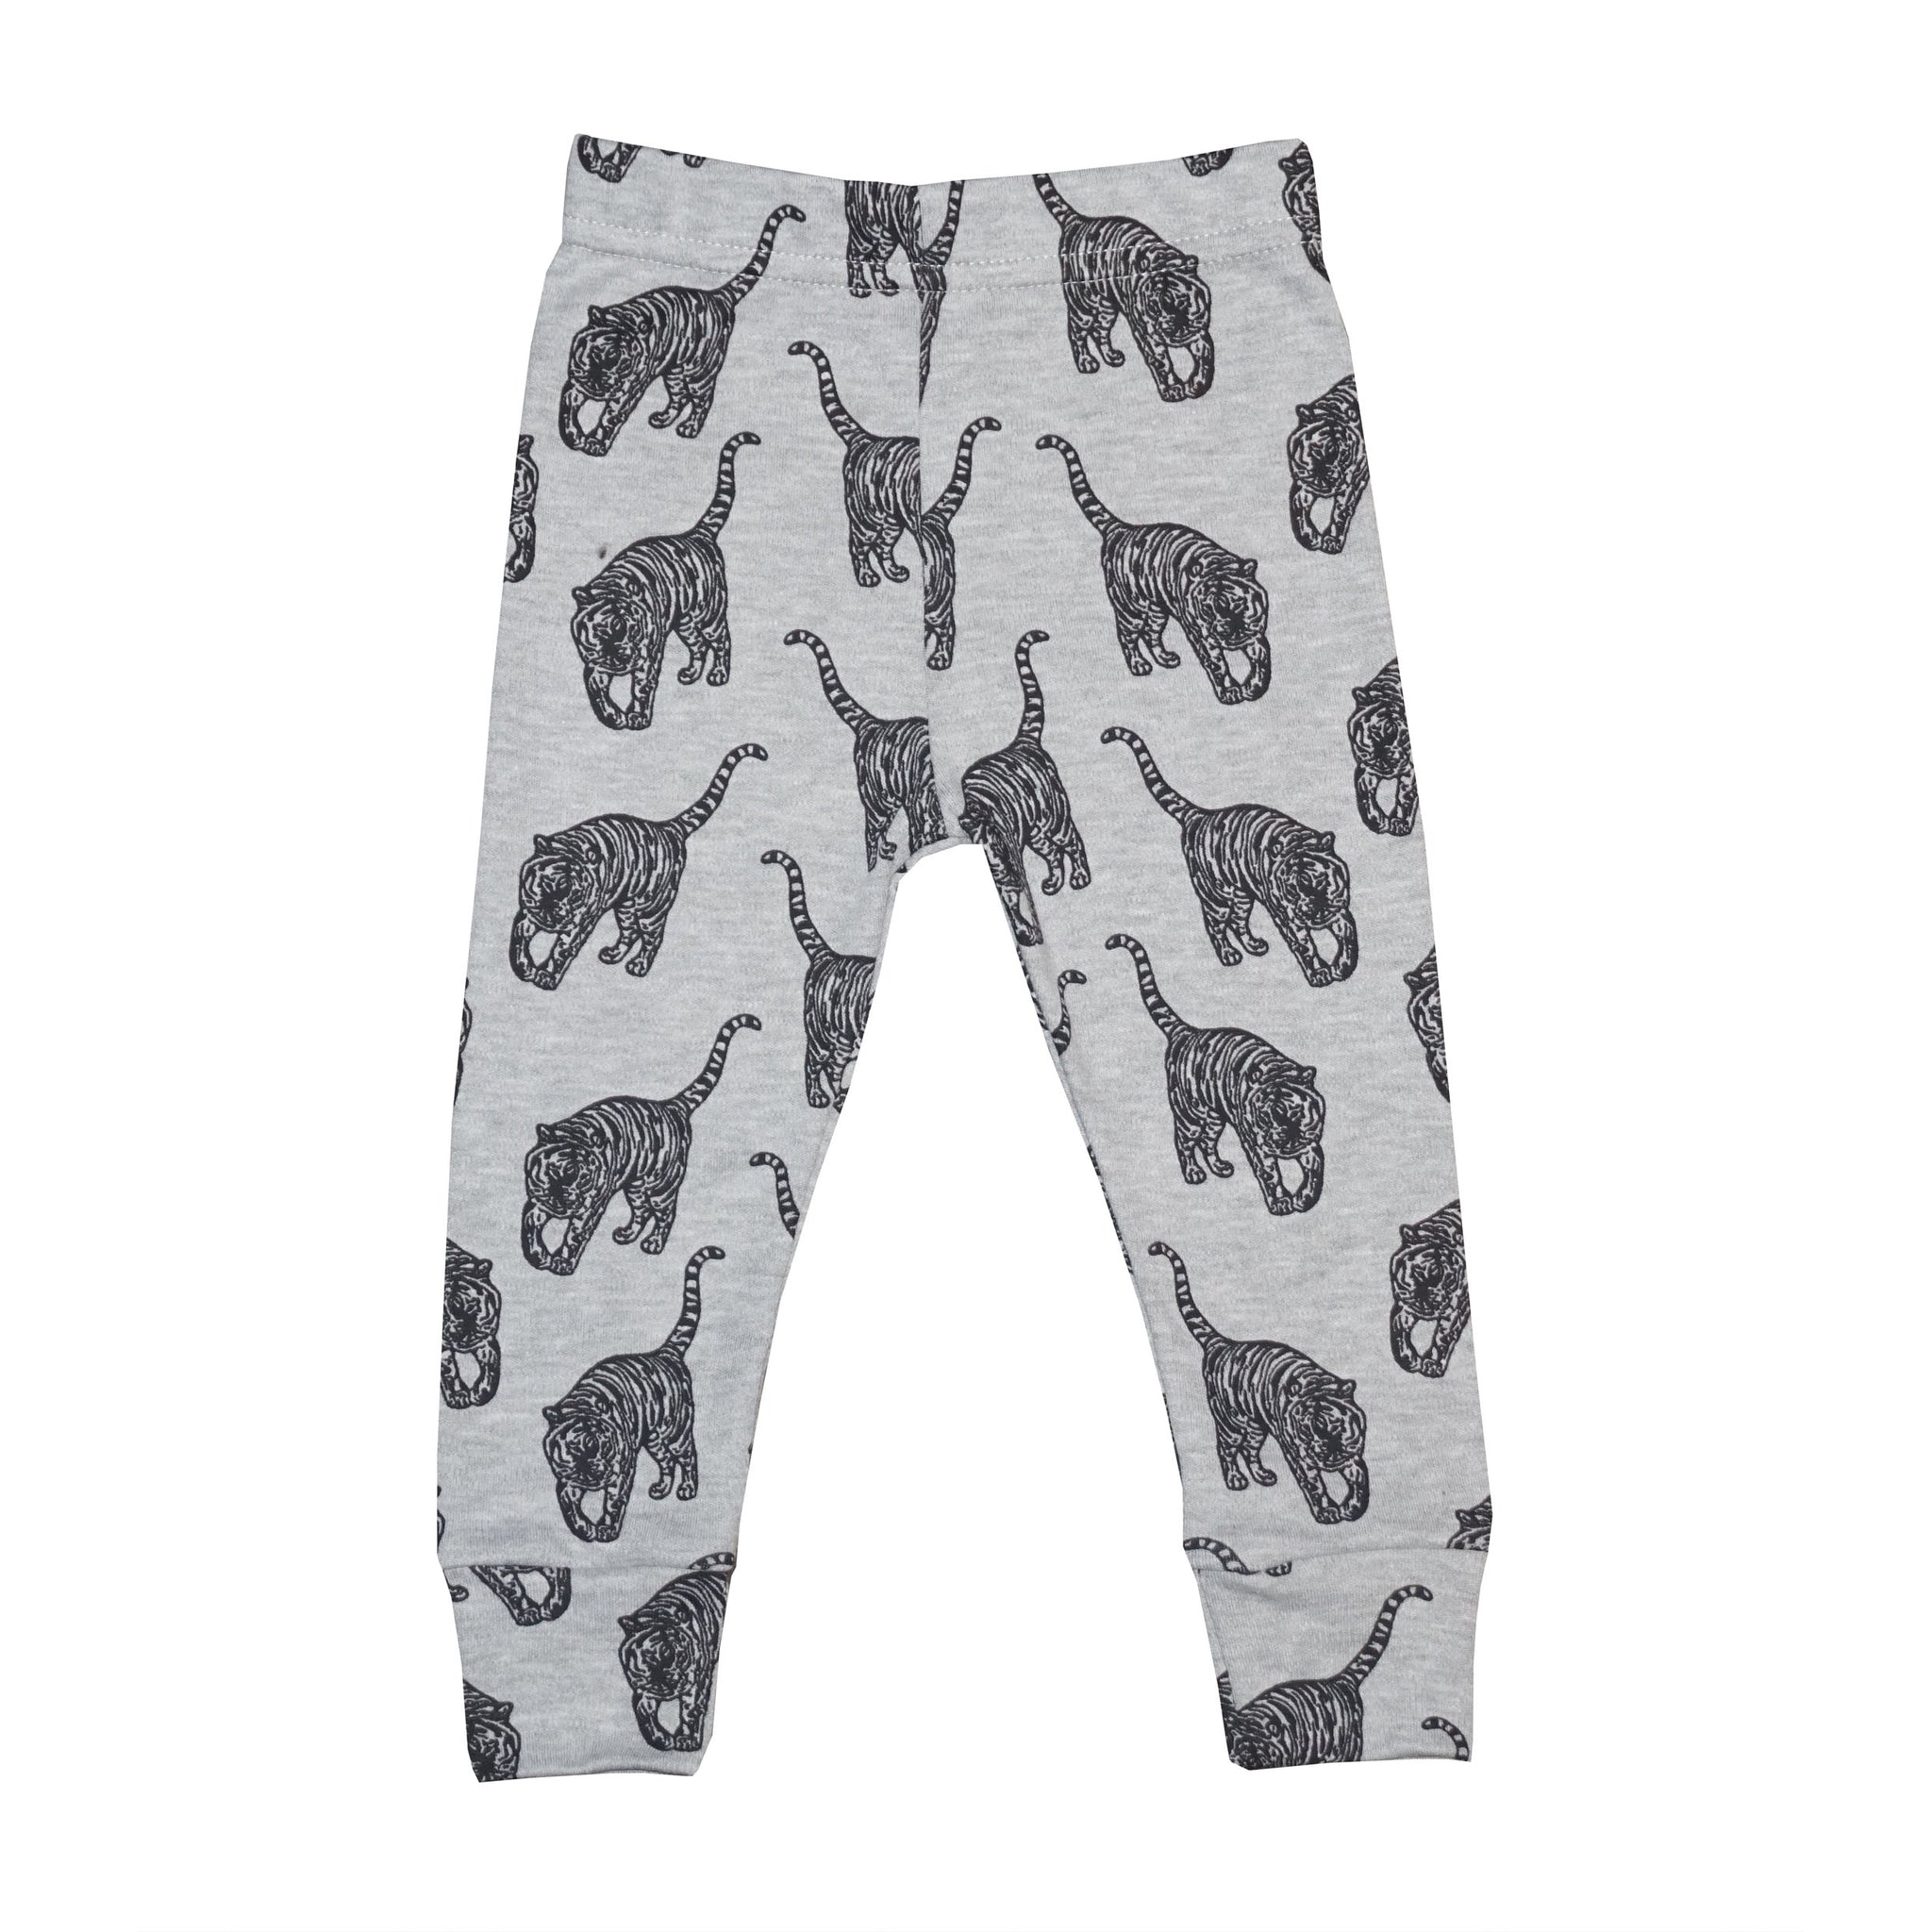 LIMITED EDITION* Prowling Tiger 100% Cotton Leggings (0-5 years